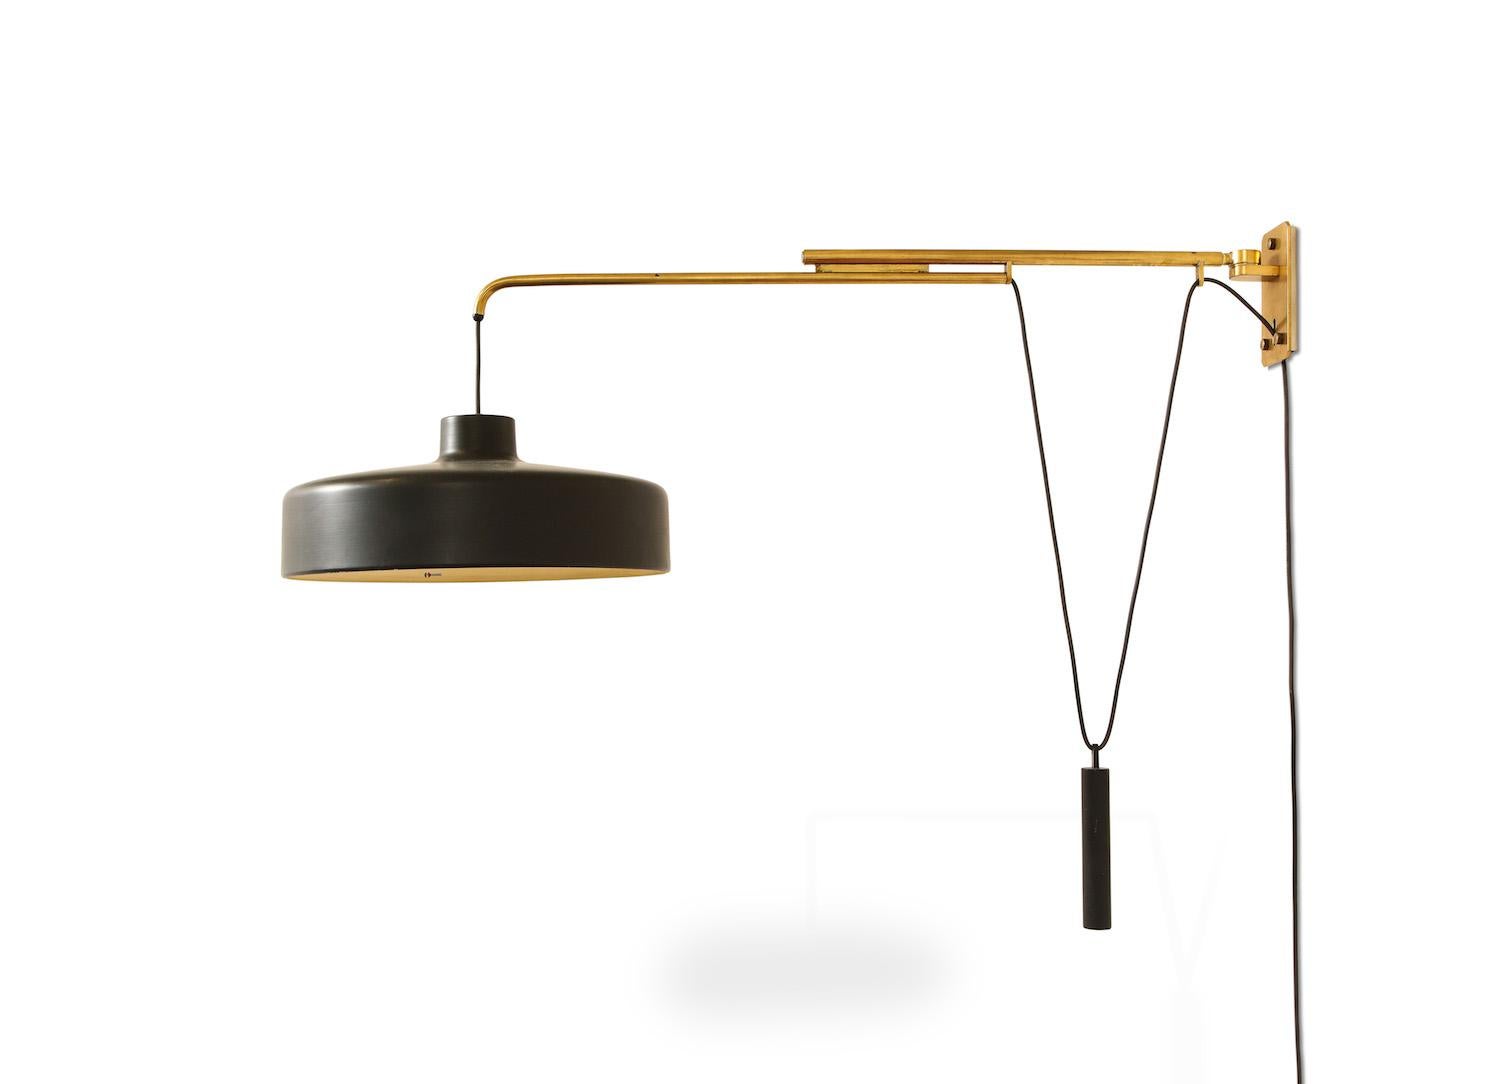 20th Century Adjustable Sconce #149/N by Gino Sarfatti for Arteluce For Sale